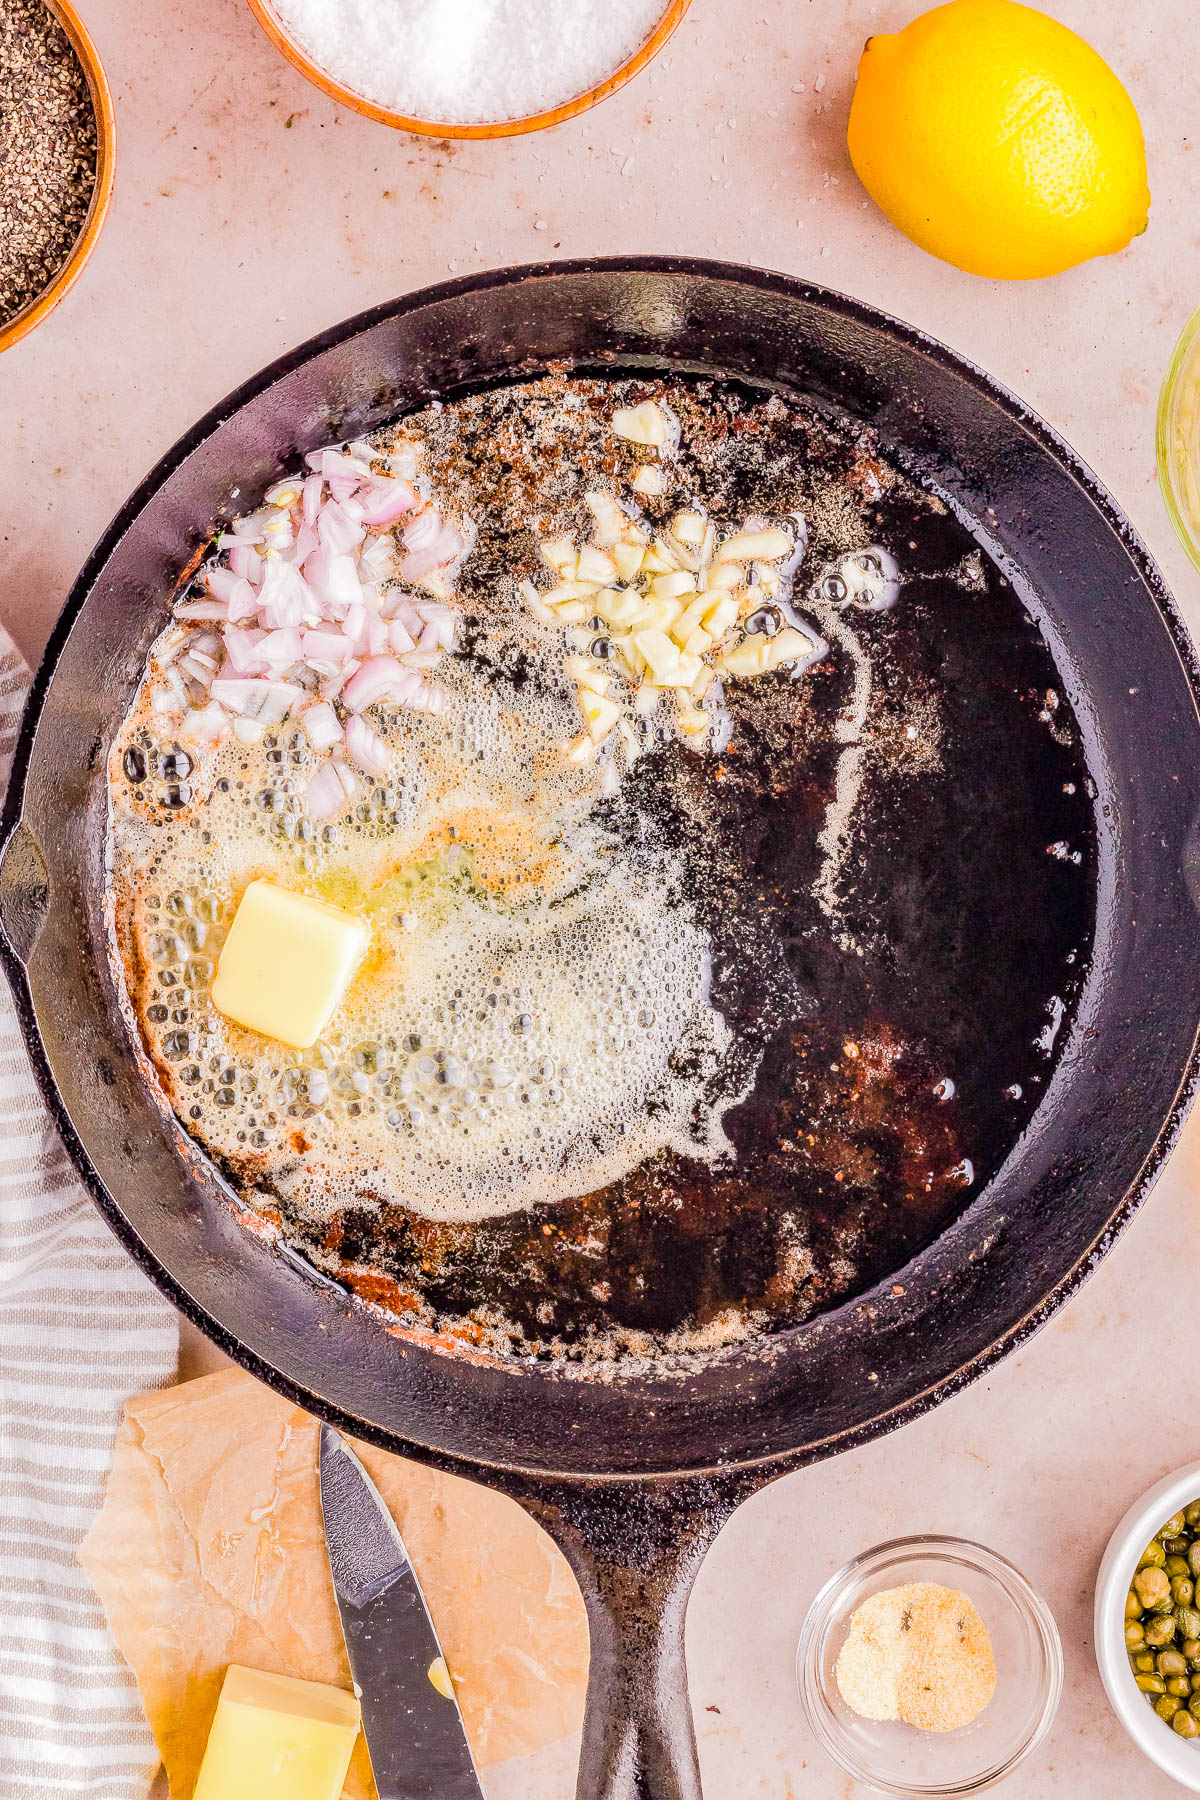 Ingredients being sautéed in butter on a cast-iron skillet, with cooking utensils and spices nearby.